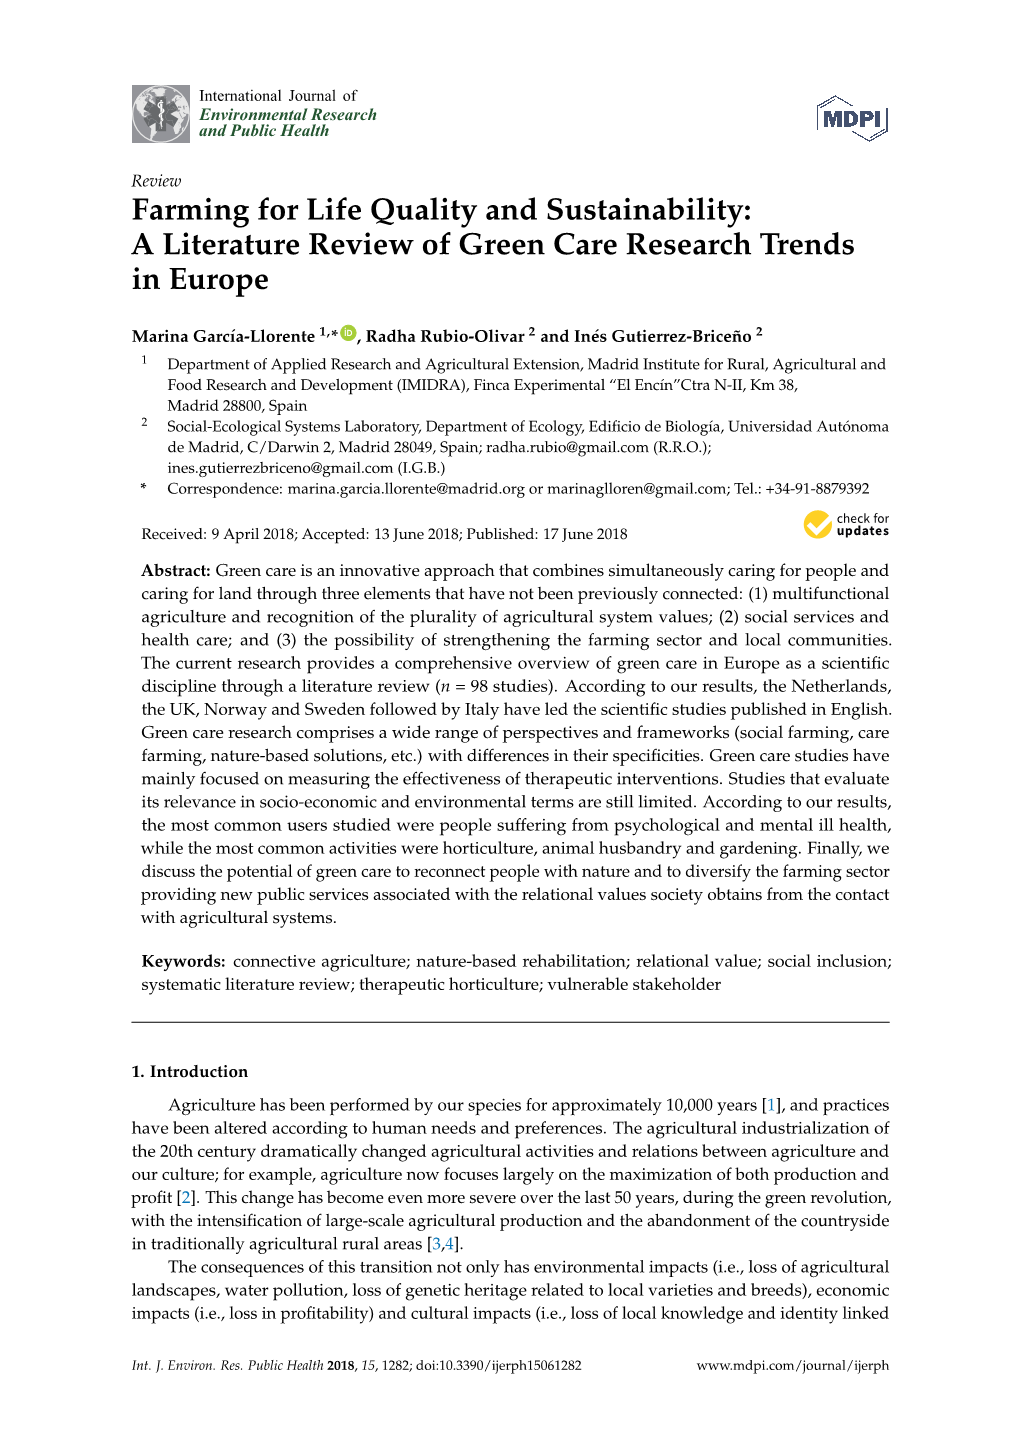 Farming for Life Quality and Sustainability: a Literature Review of Green Care Research Trends in Europe